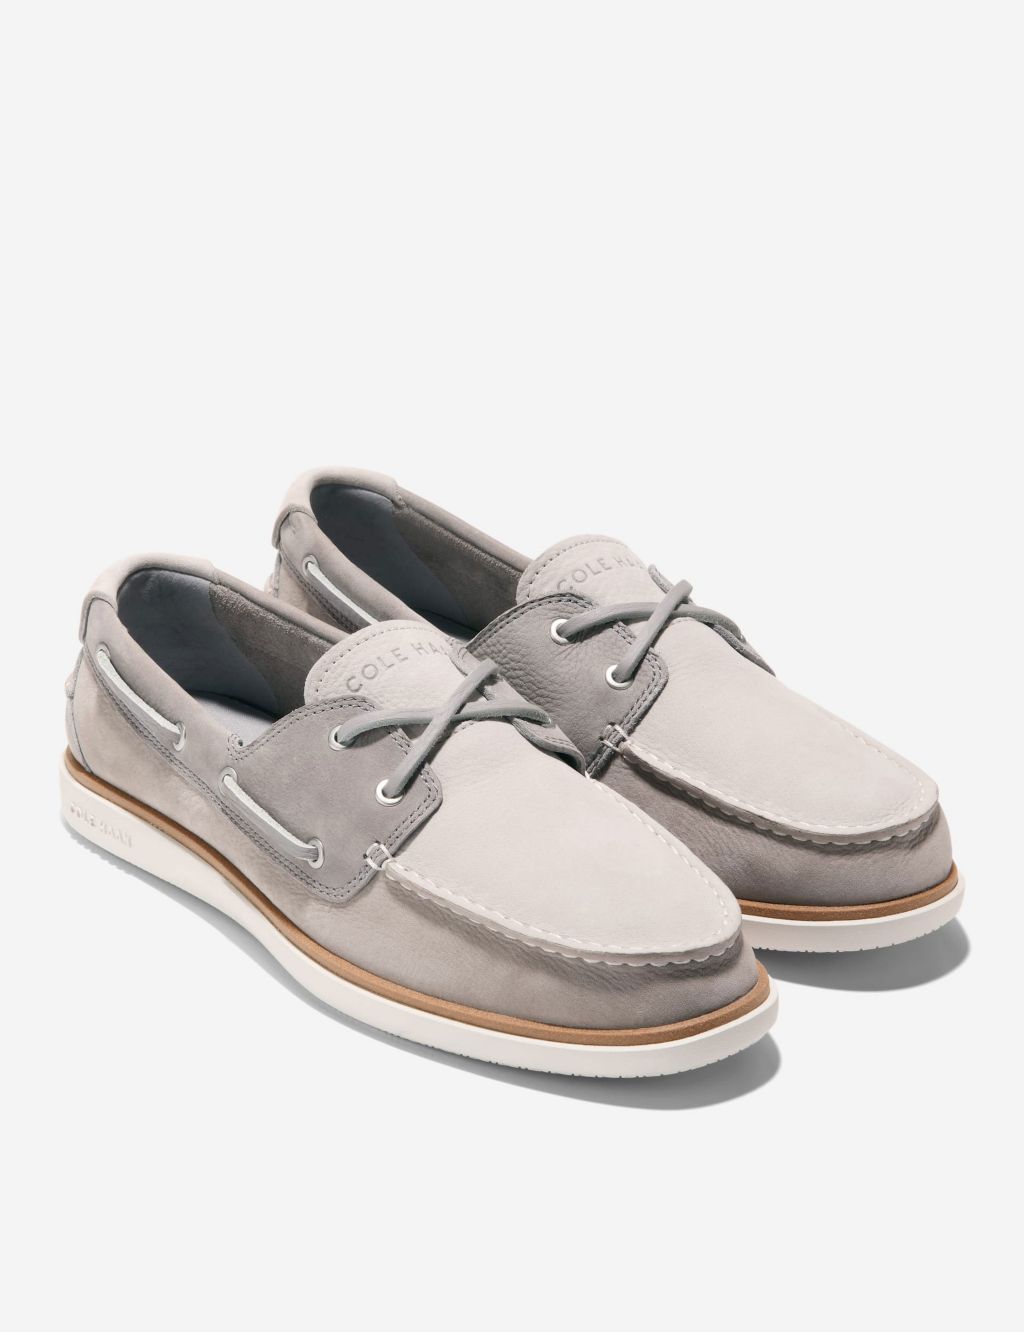 Leather Slip-On Boat Shoes 1 of 6